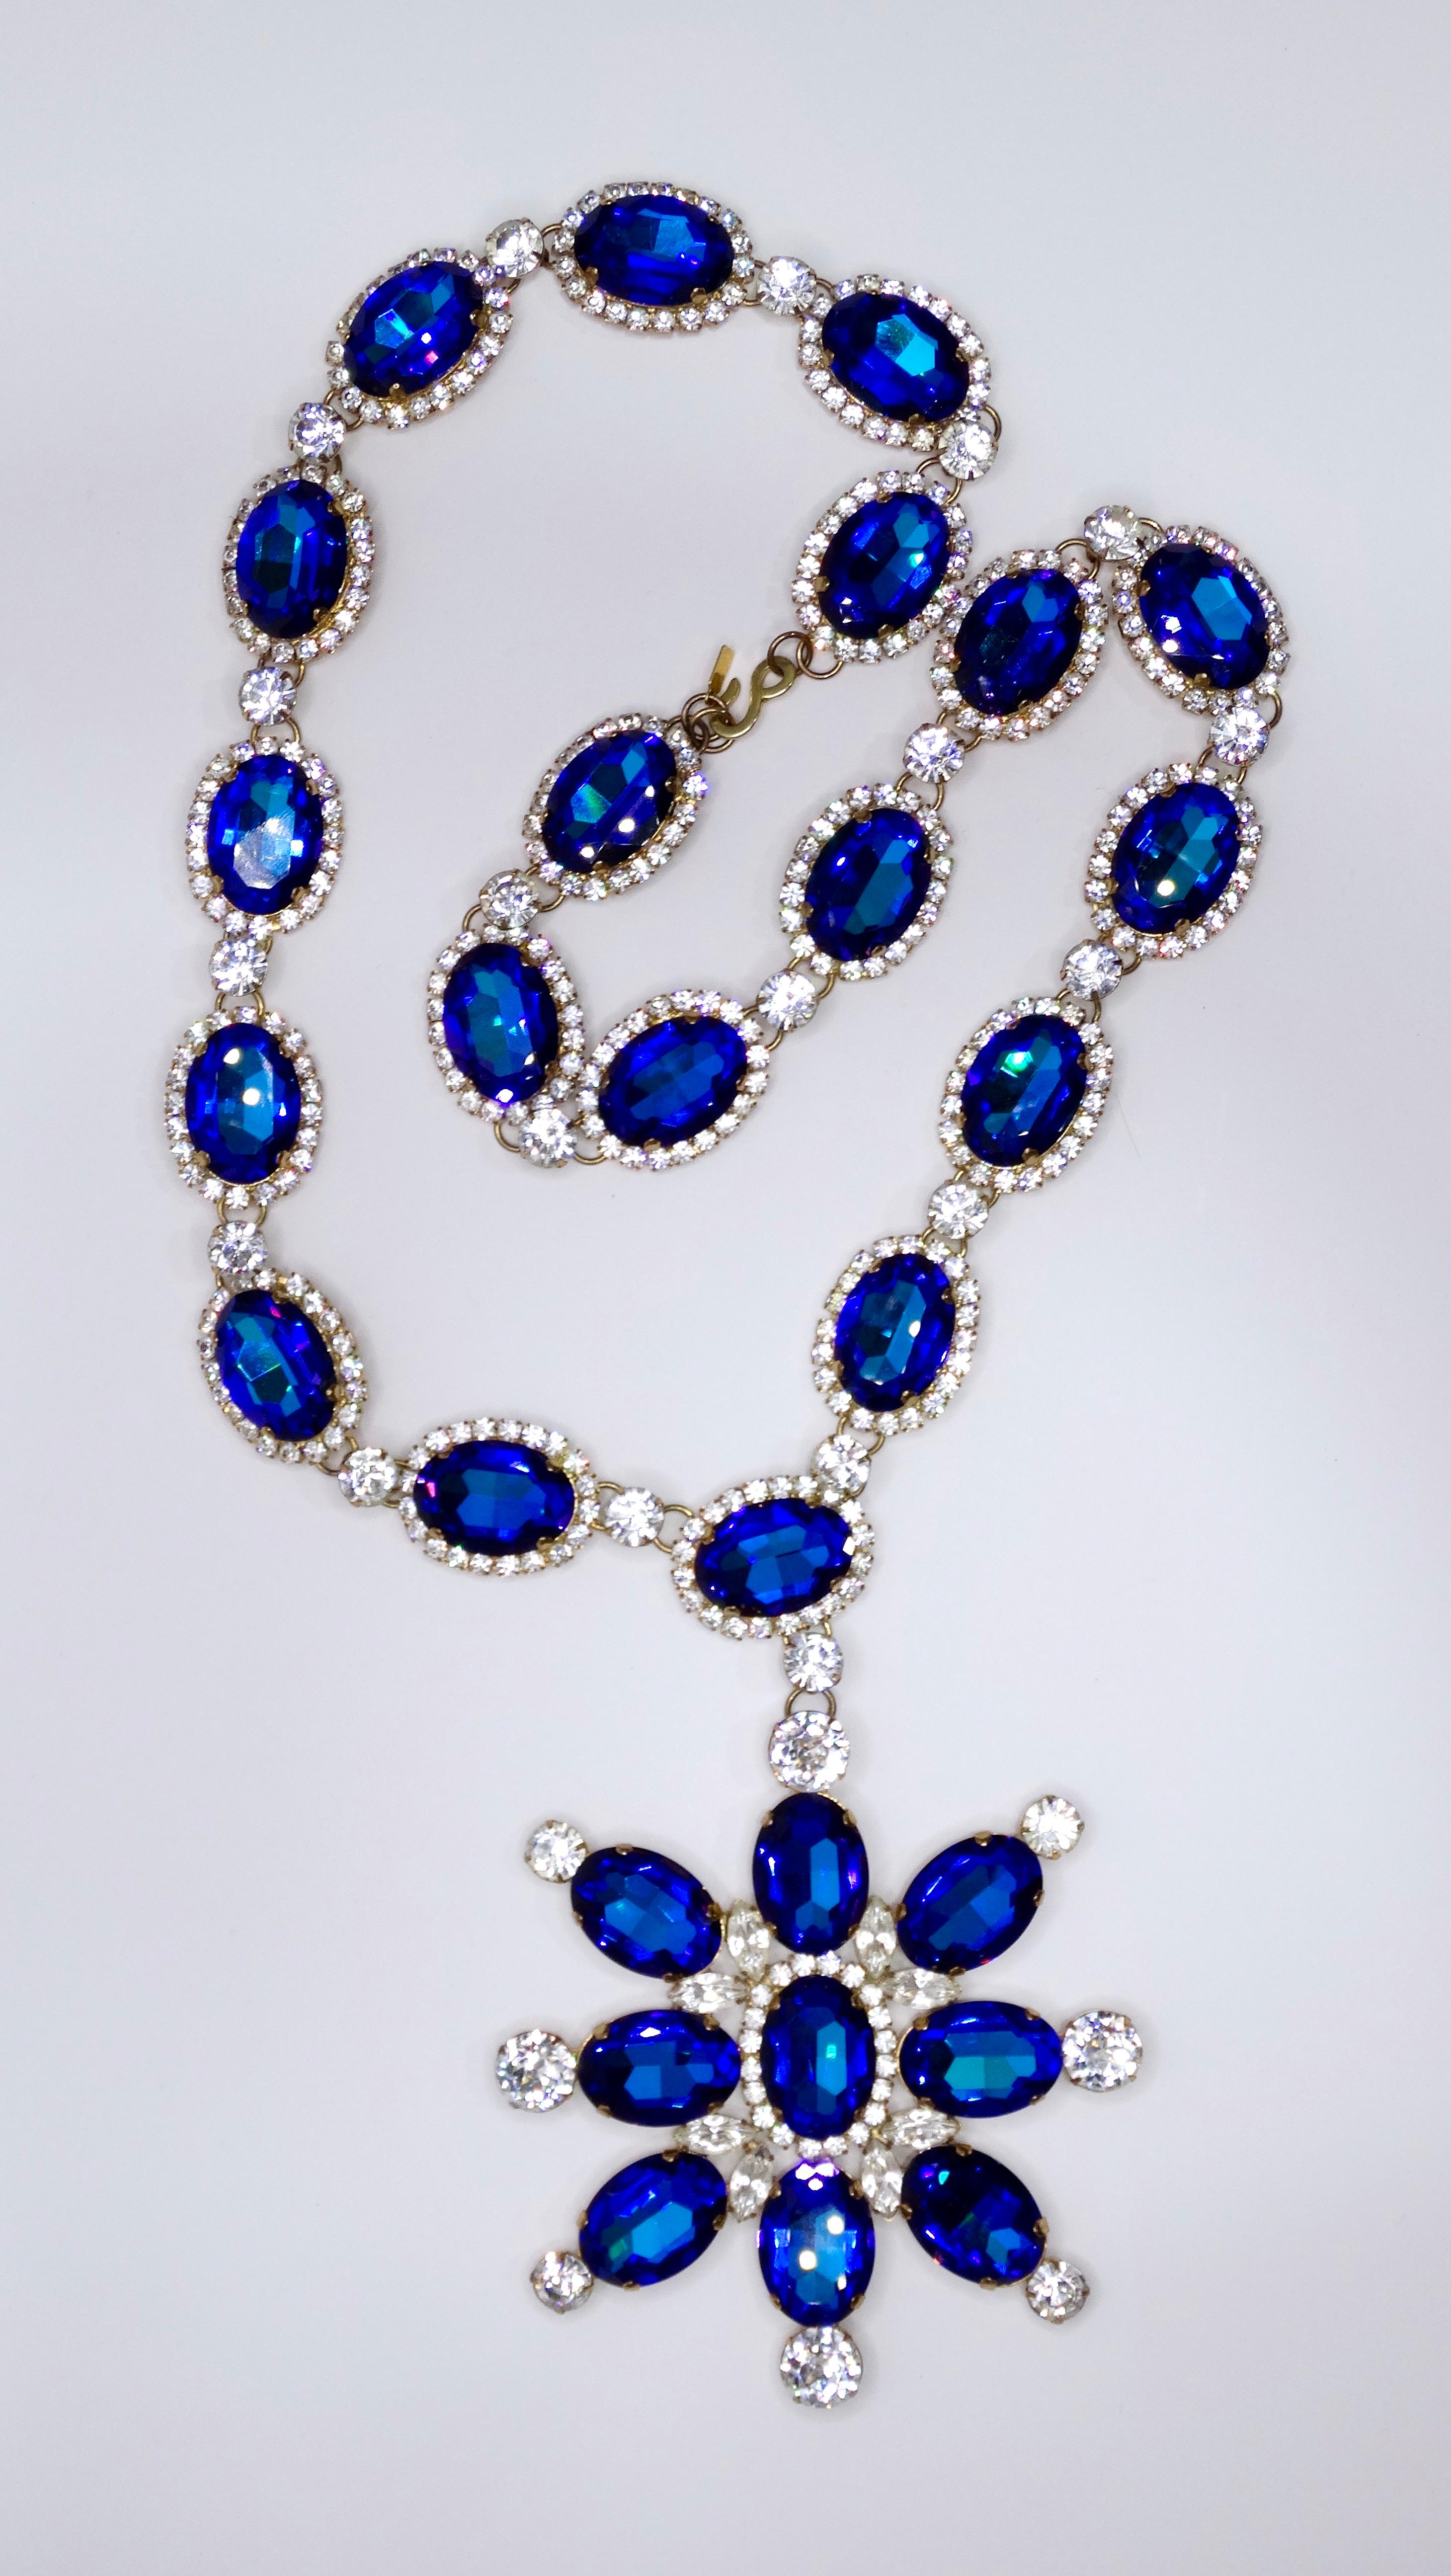 Women's or Men's Kenneth Jay Lane 1960s Jeweled Statement Necklace For Sale